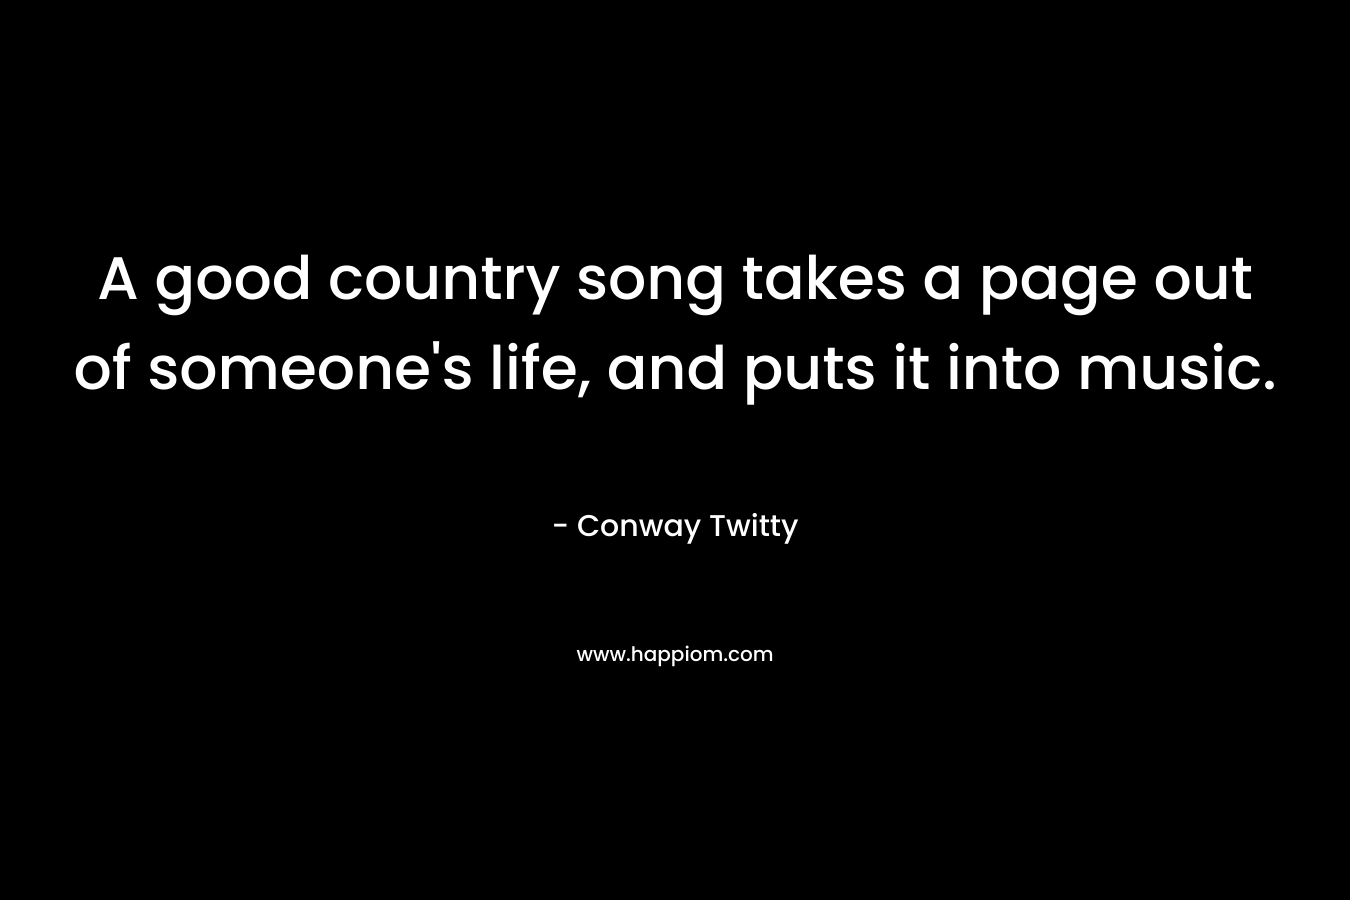 A good country song takes a page out of someone's life, and puts it into music.